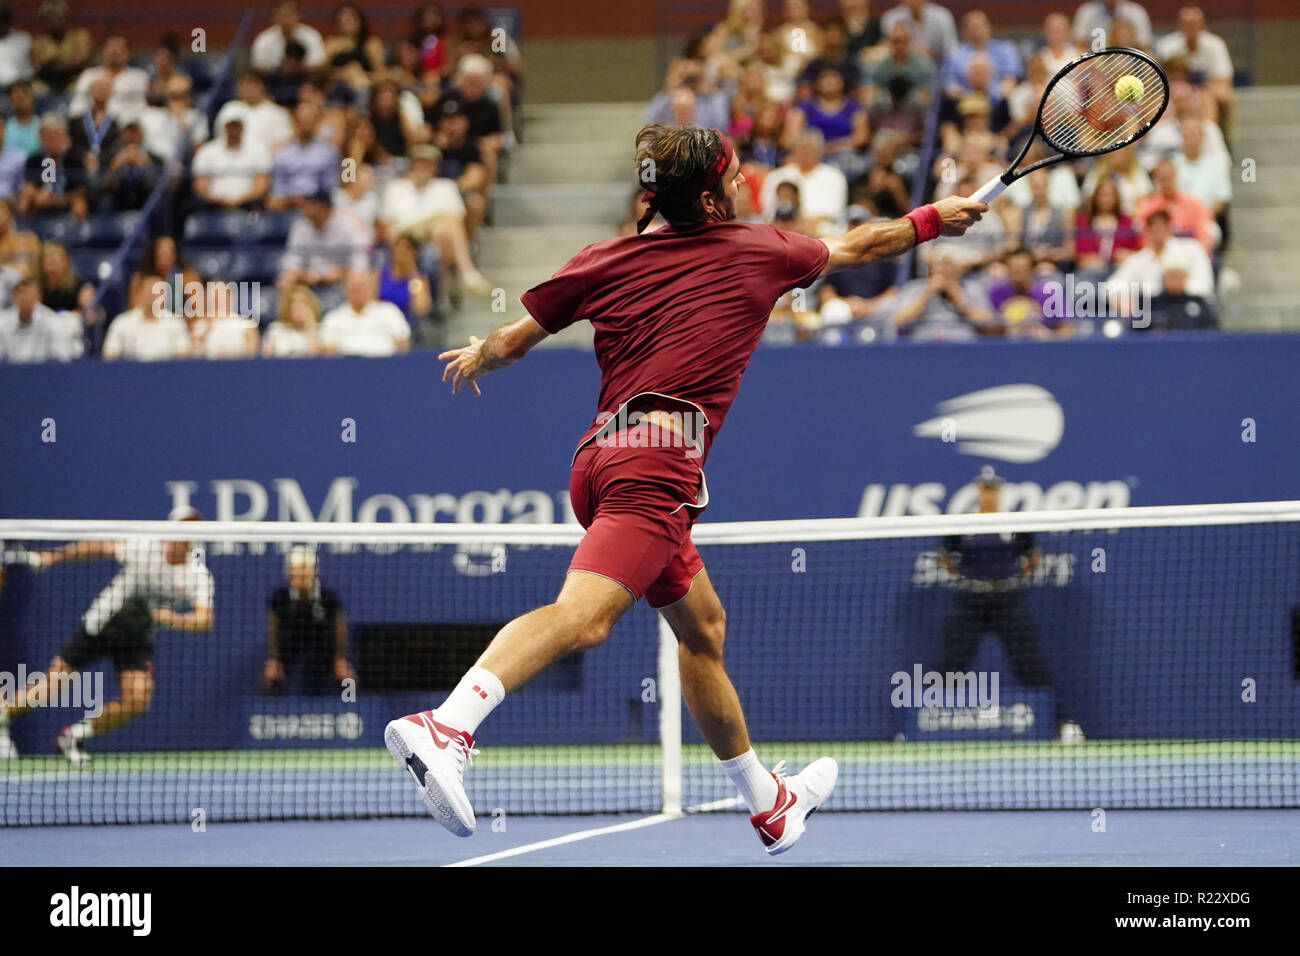 Roger Federer Us Open High Resolution Stock Photography and Images - Alamy